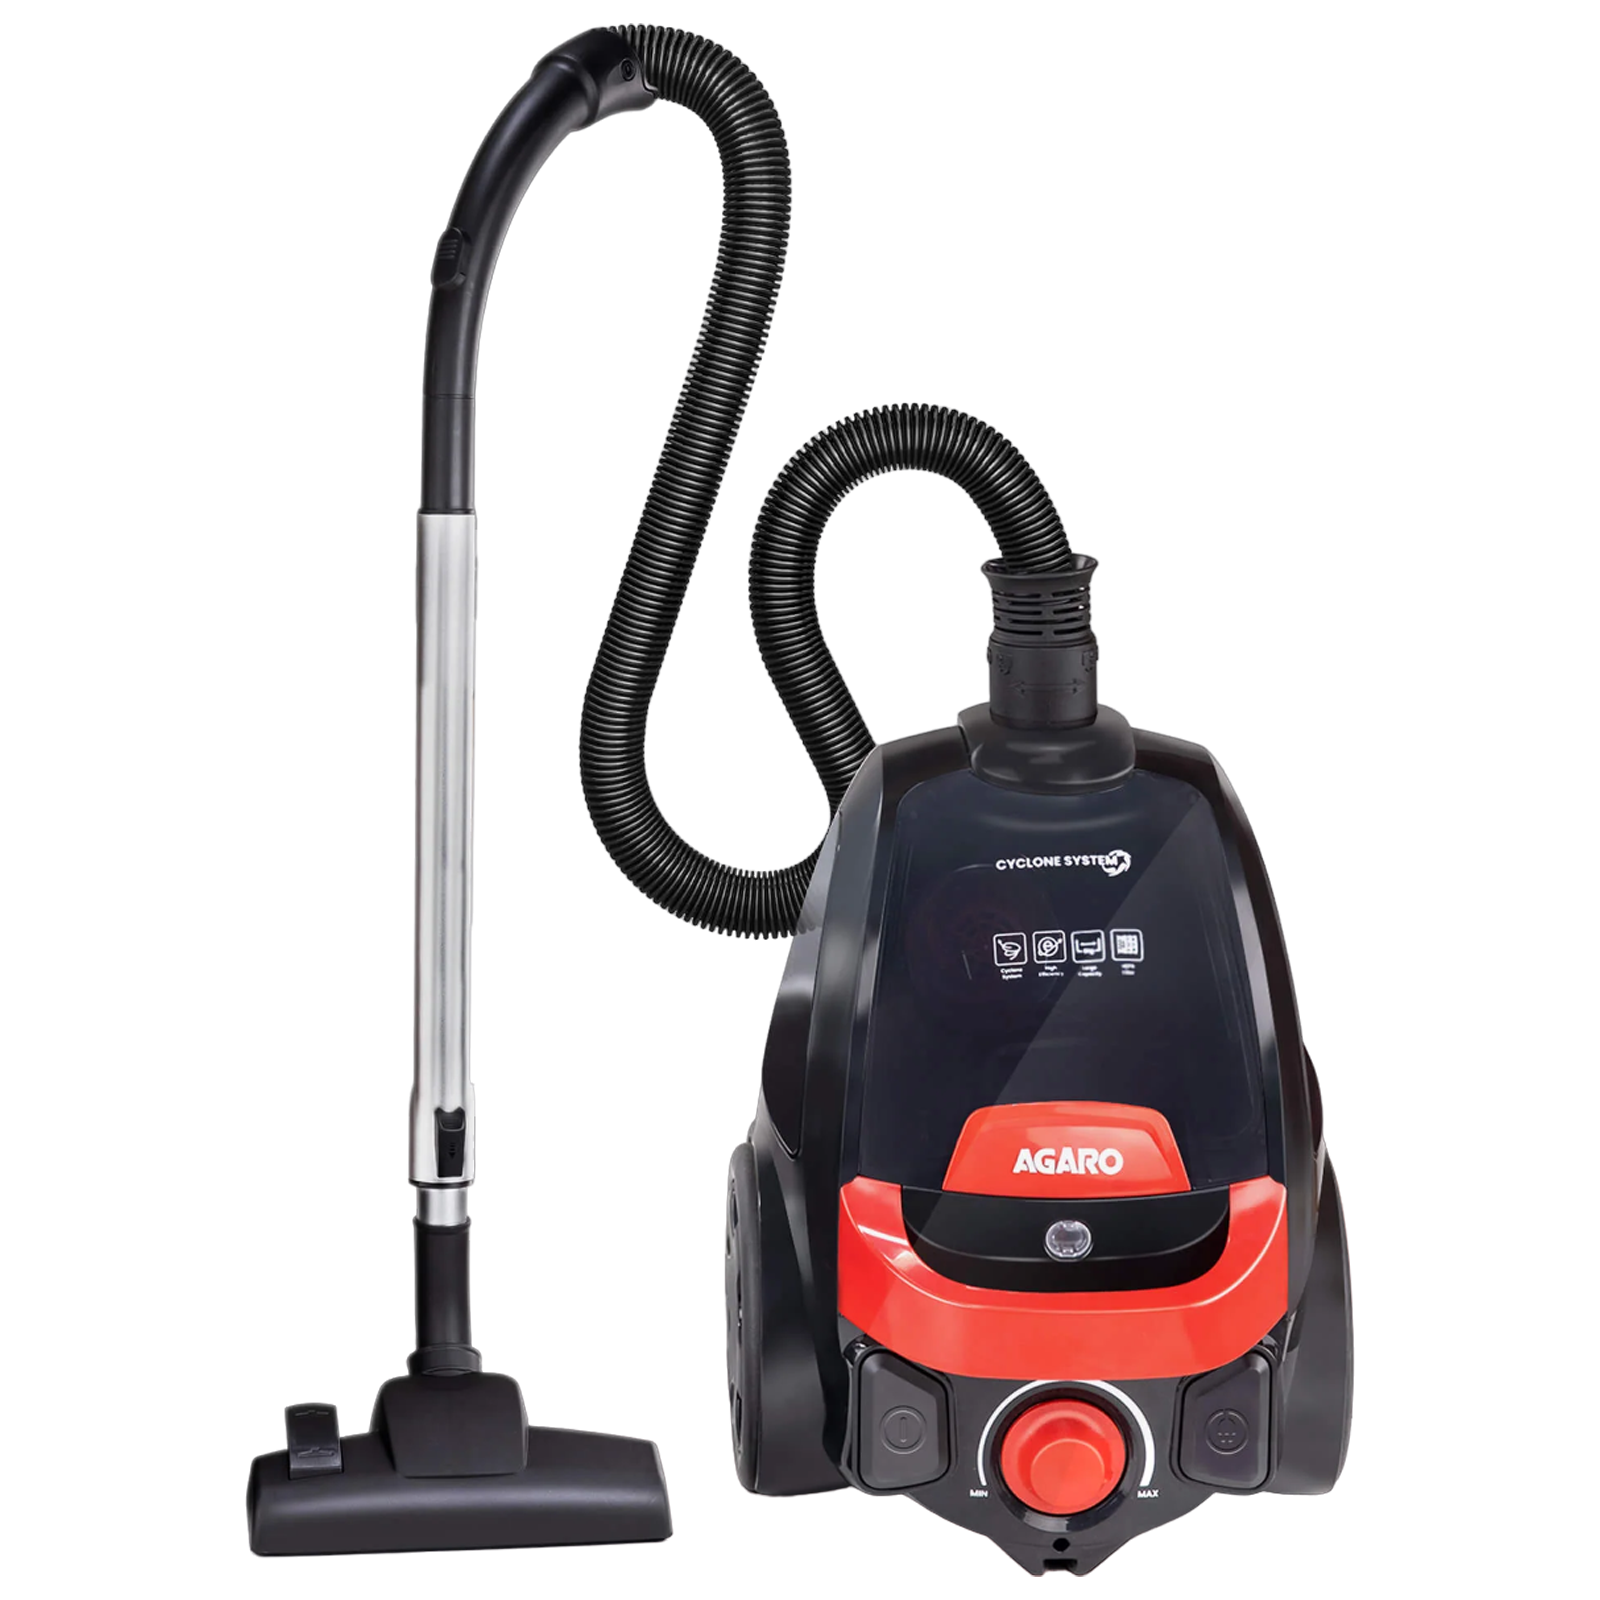 AGARO ICON 1600 Watts Dry Vacuum Cleaner (1.5 Litres Tank, 33424, Black and Red)